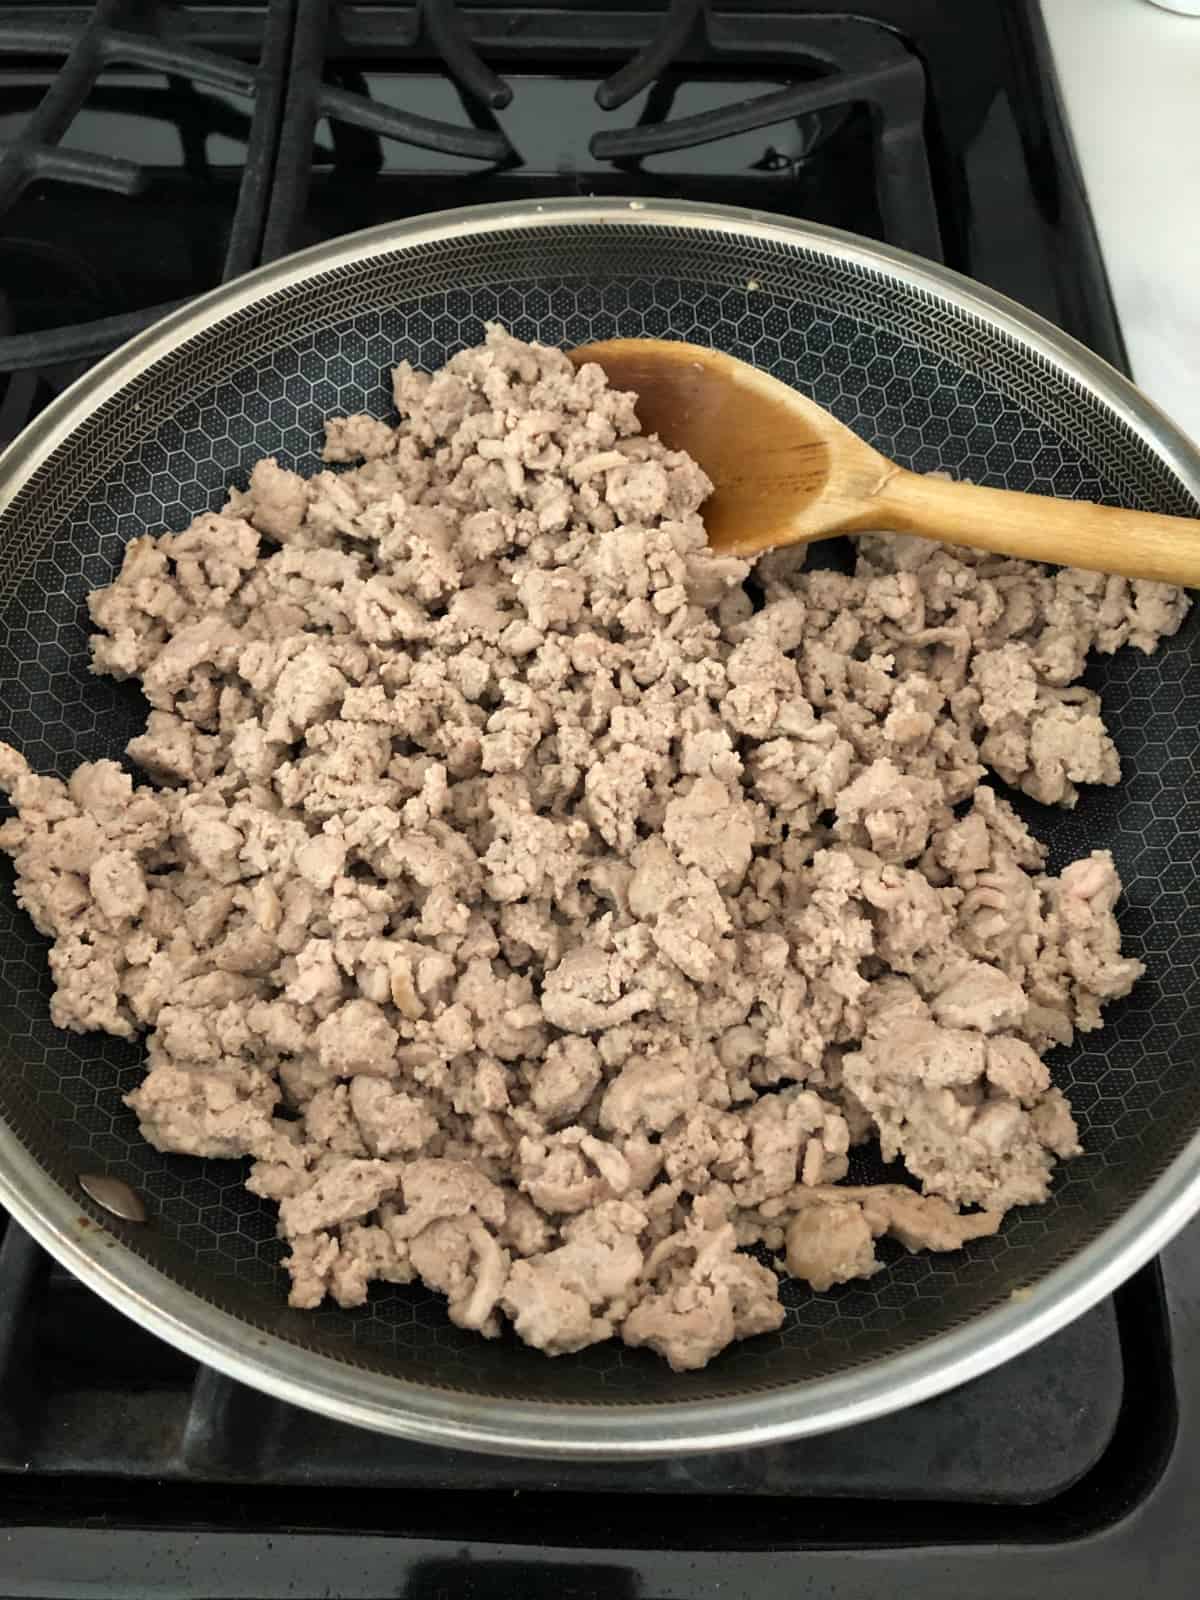 Cooking lean ground turkey in stainless pan with wooden spoon.